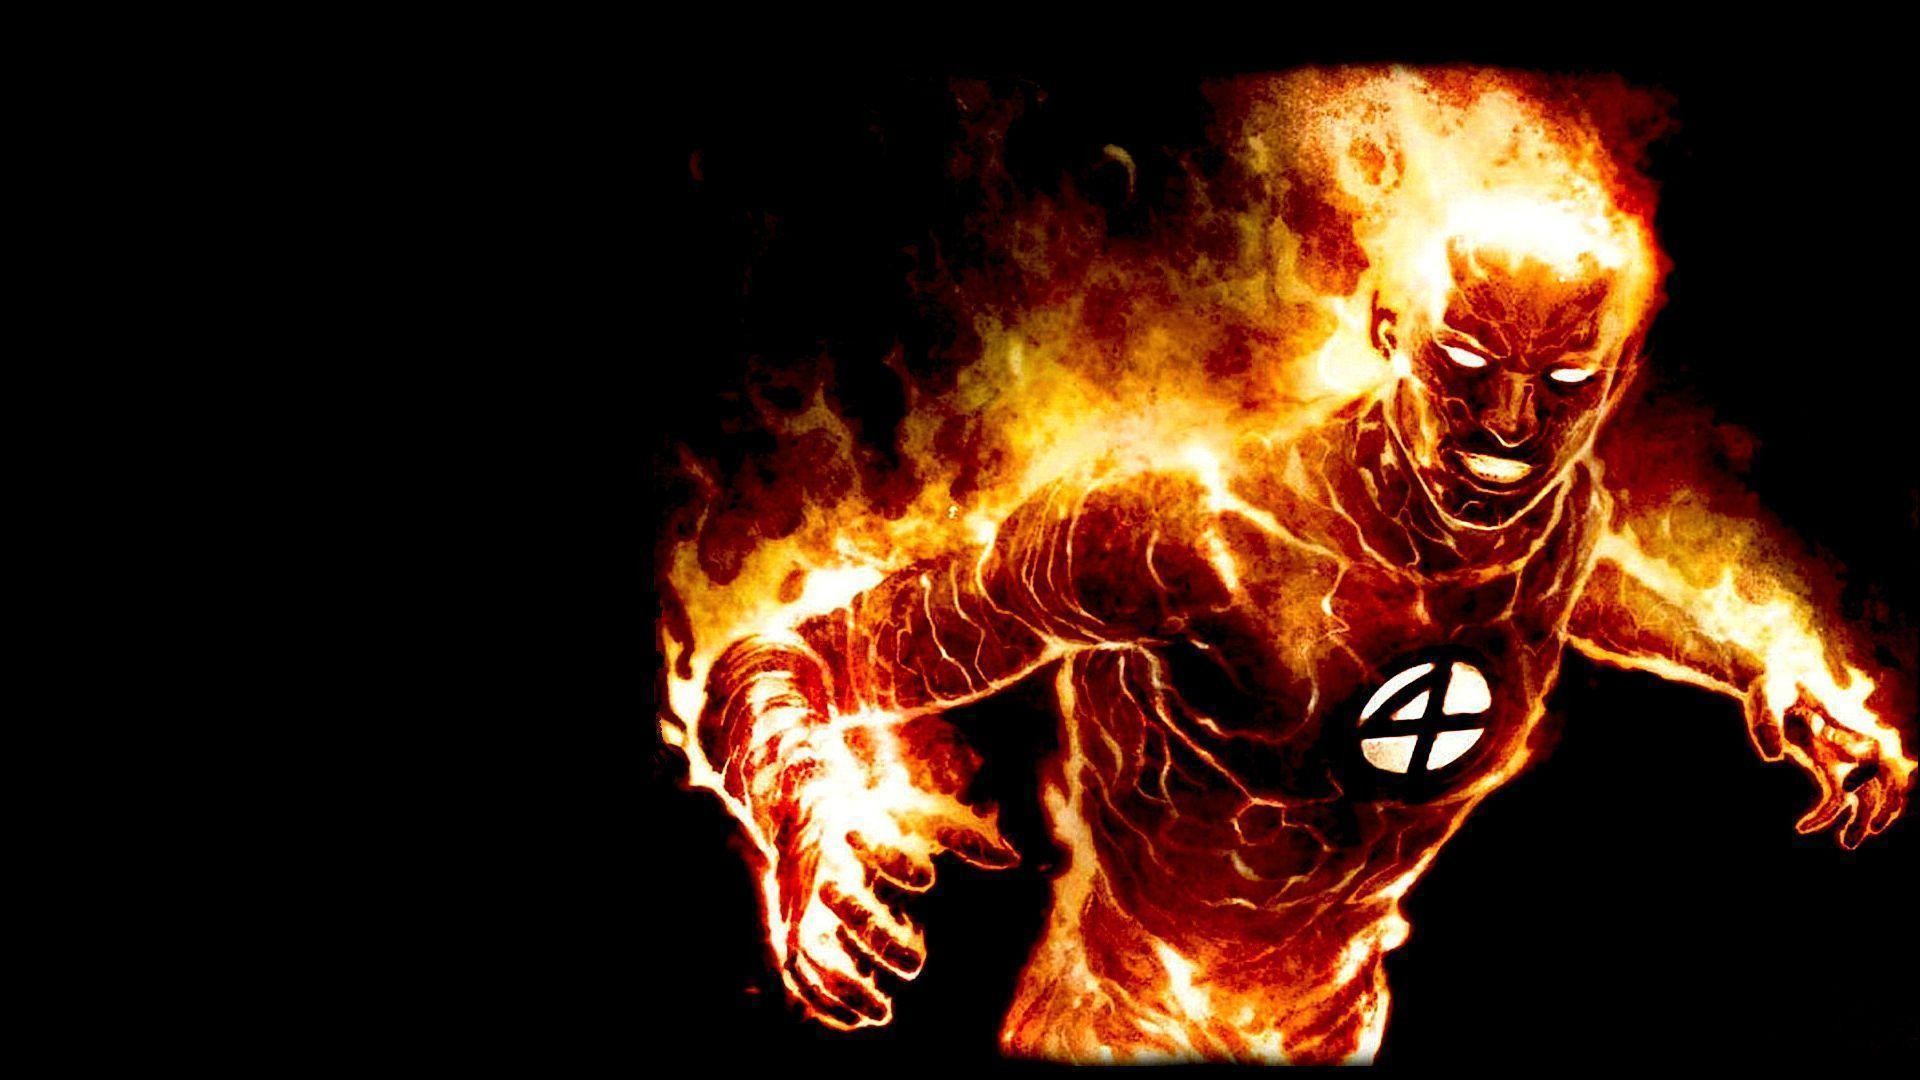 Human Torch Wallpaper images